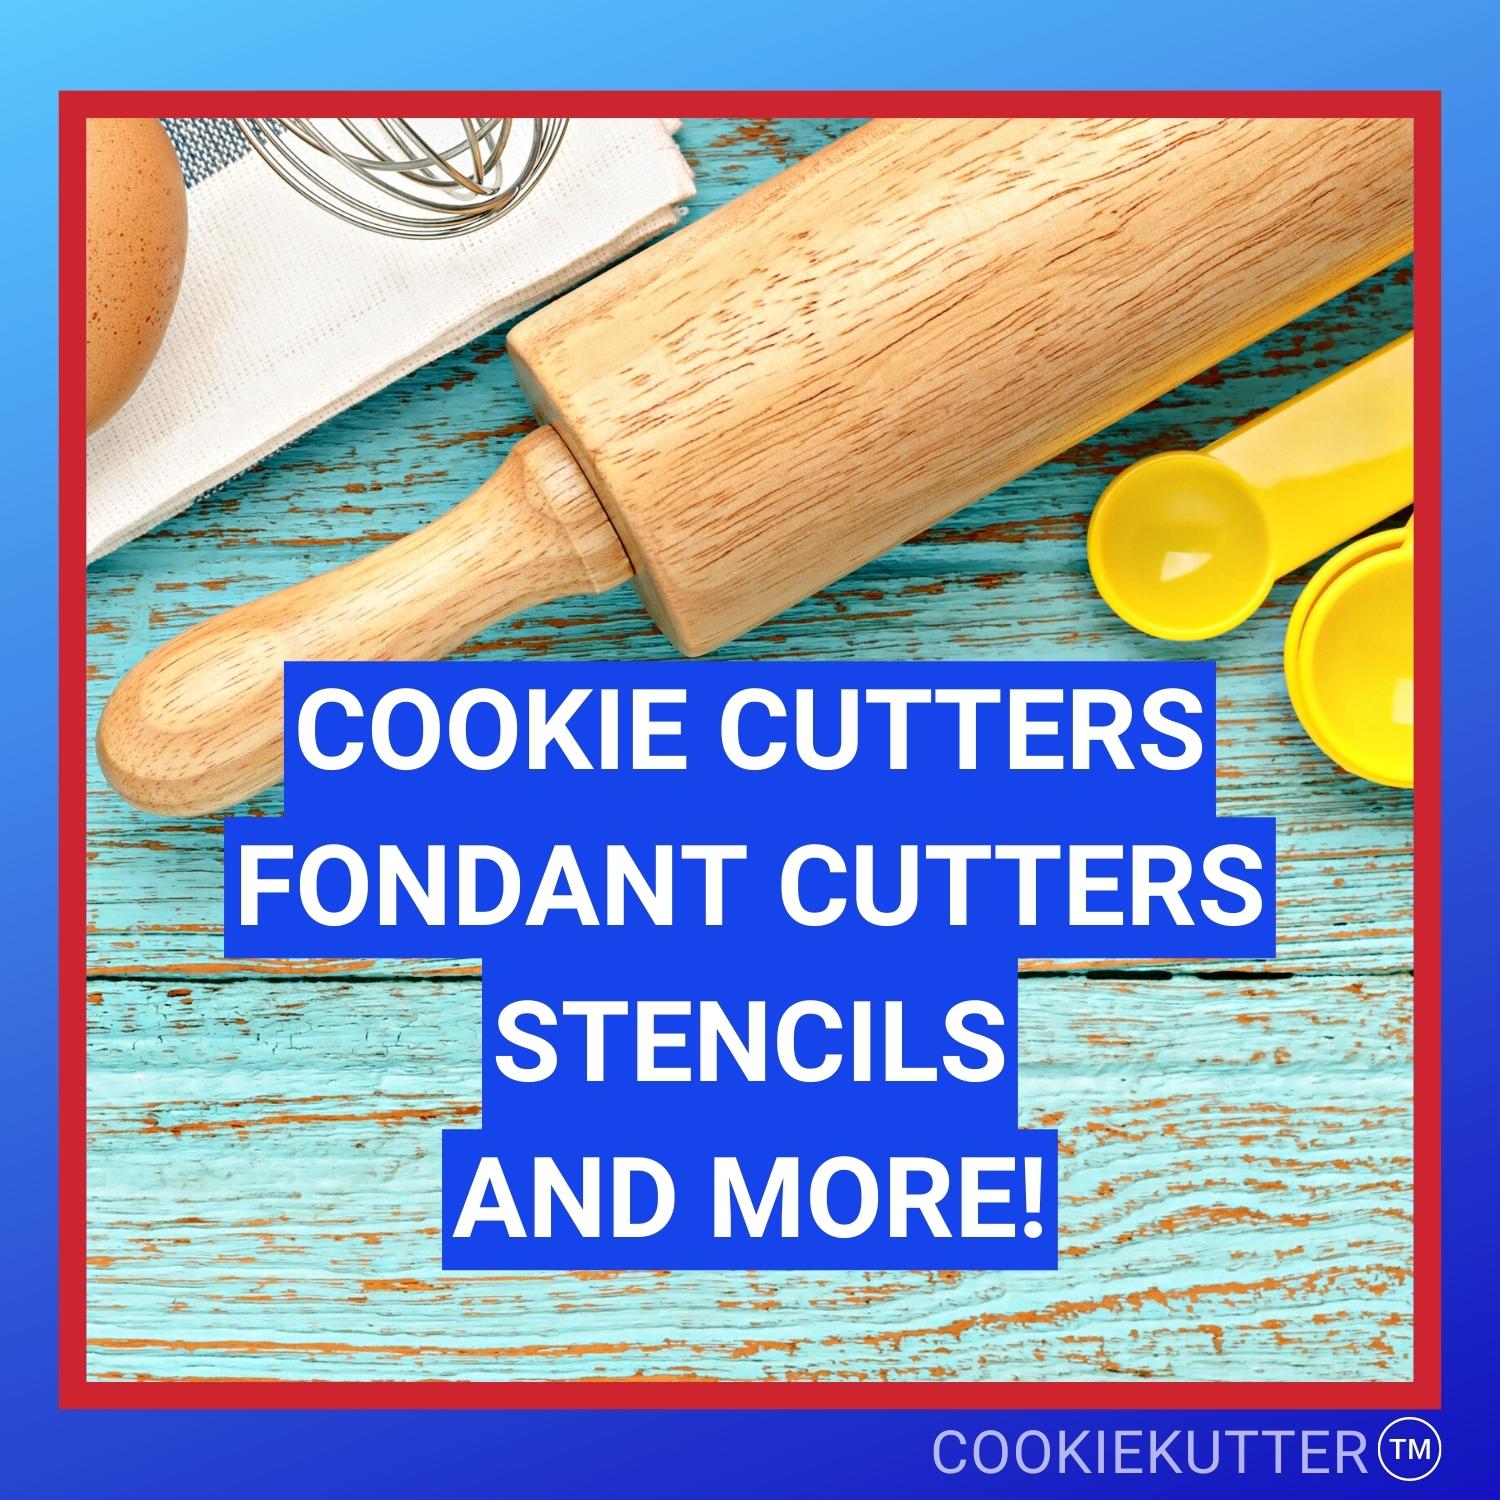 Blue and Red Border around Baking Background: Cookie Cutters, Fondant Cutters, Stencils, and More! CookieKutter TM